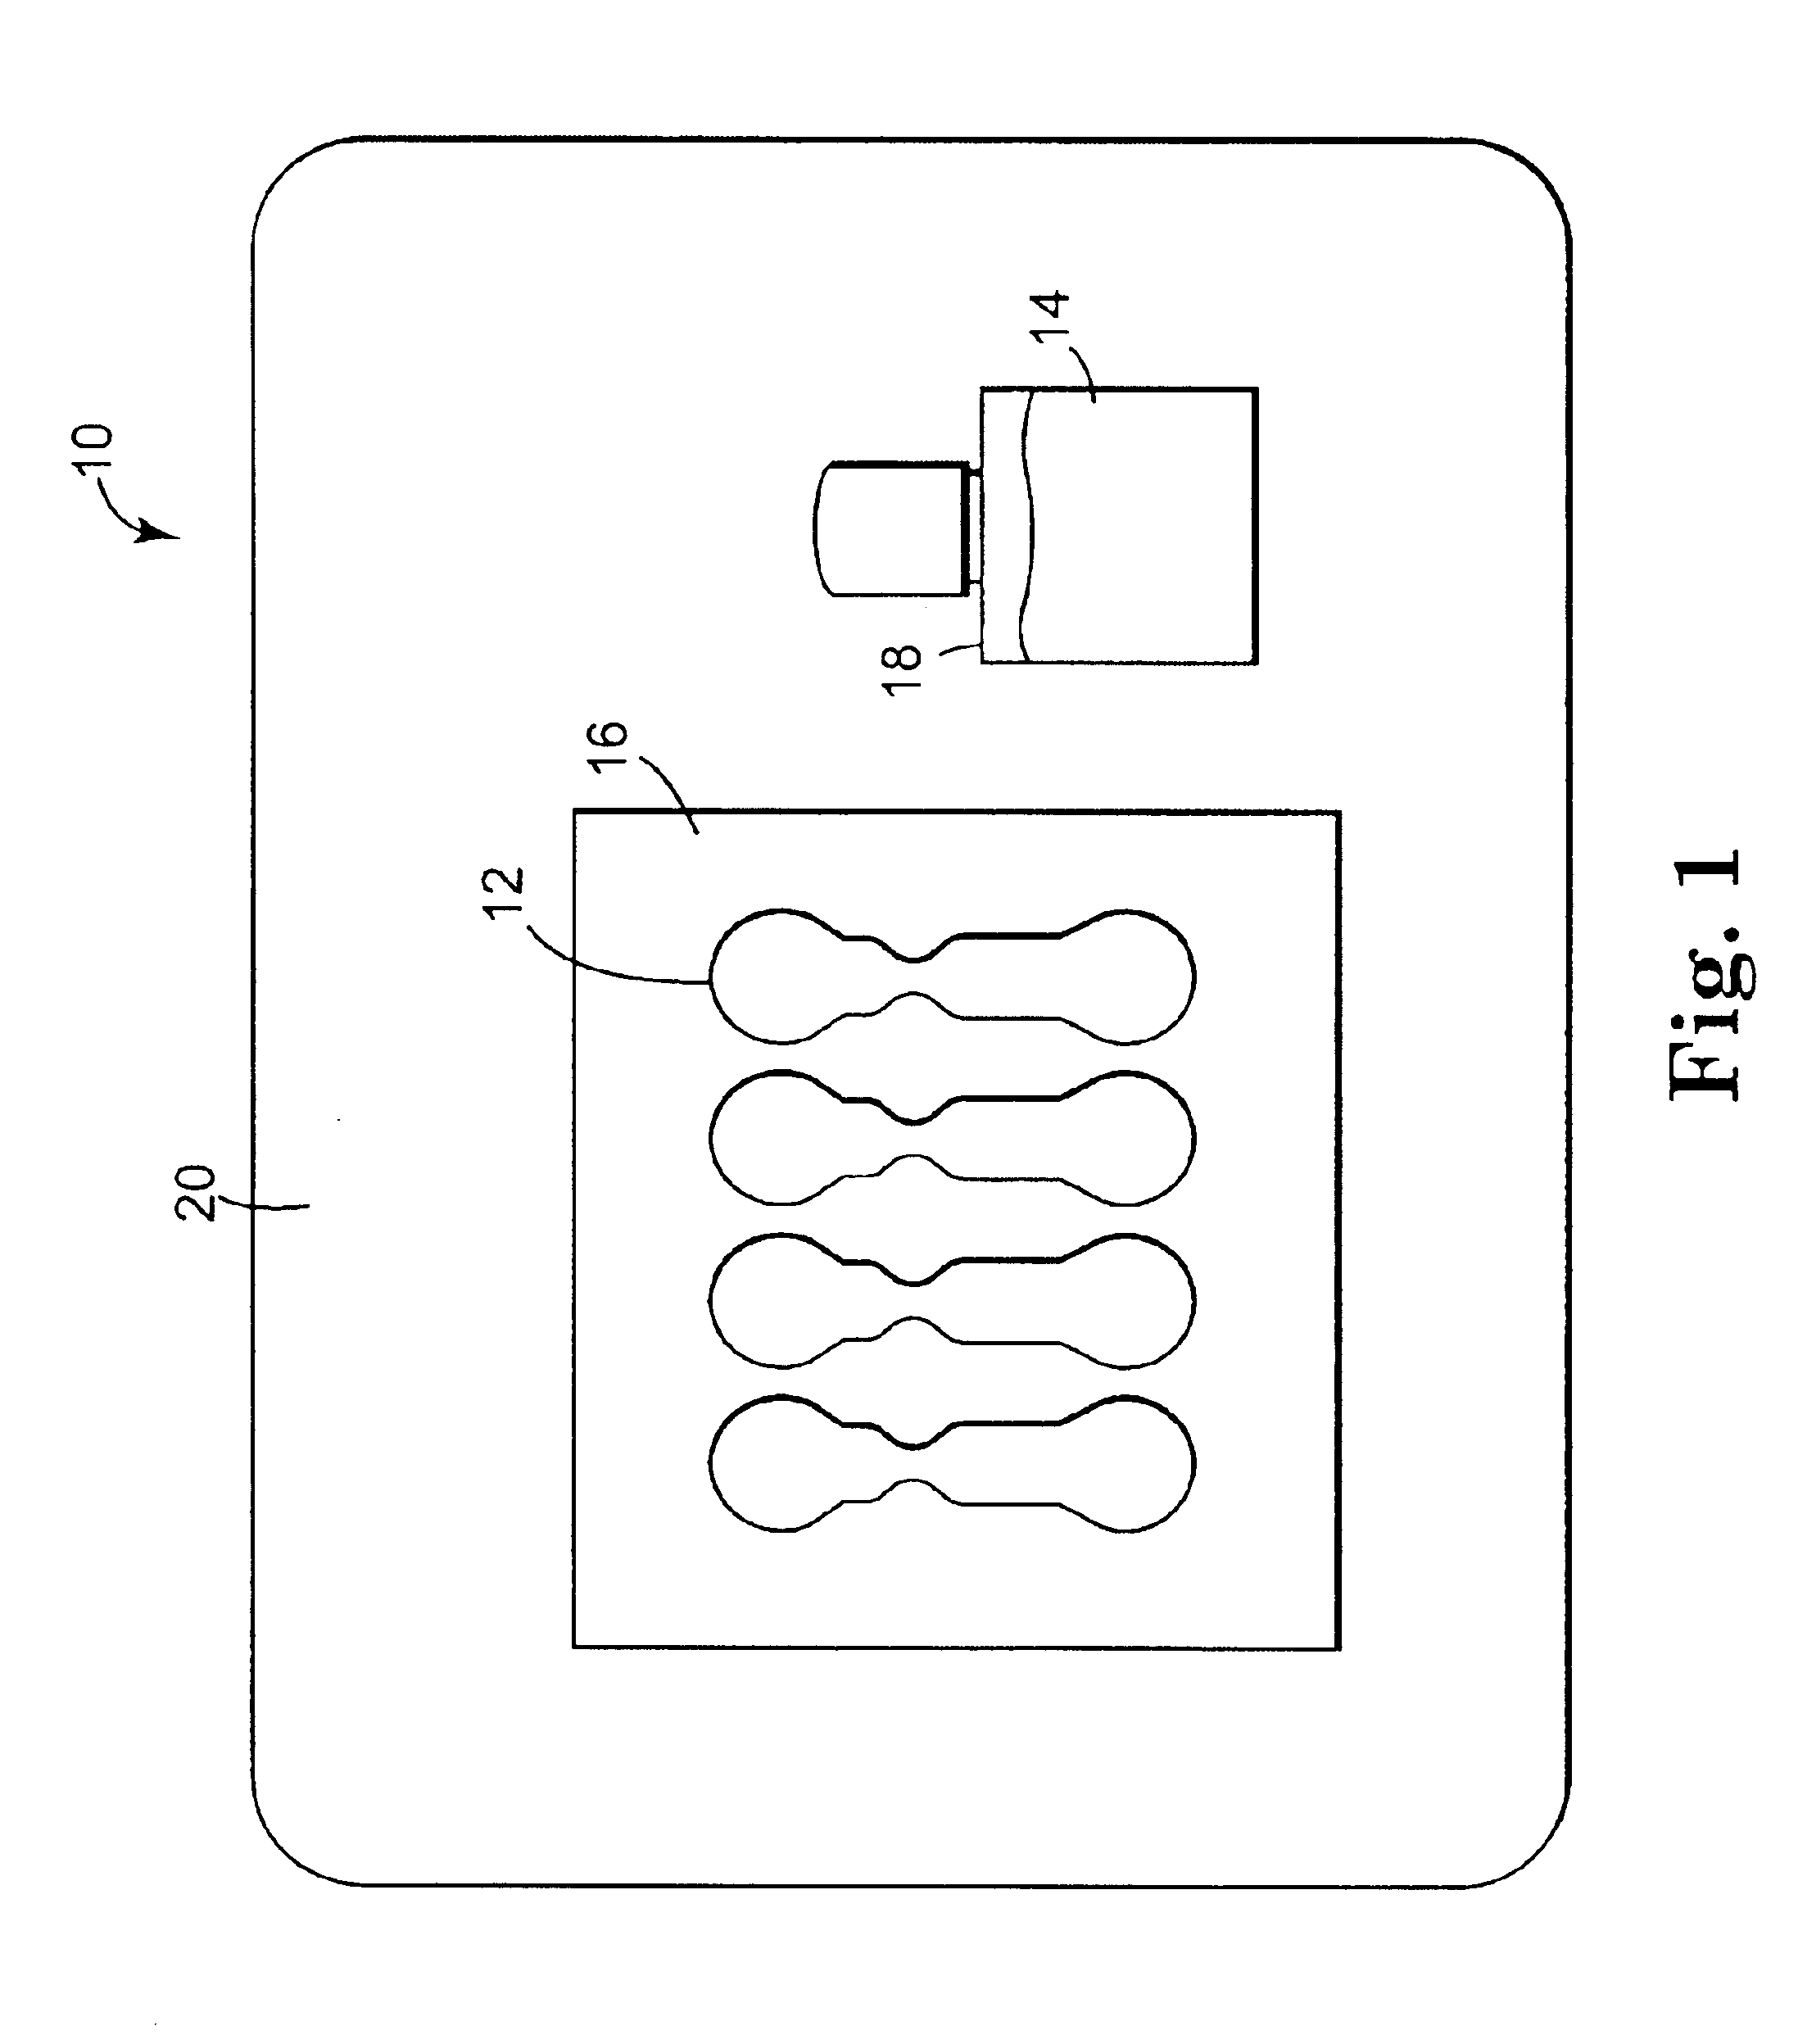 Wound closure system and method